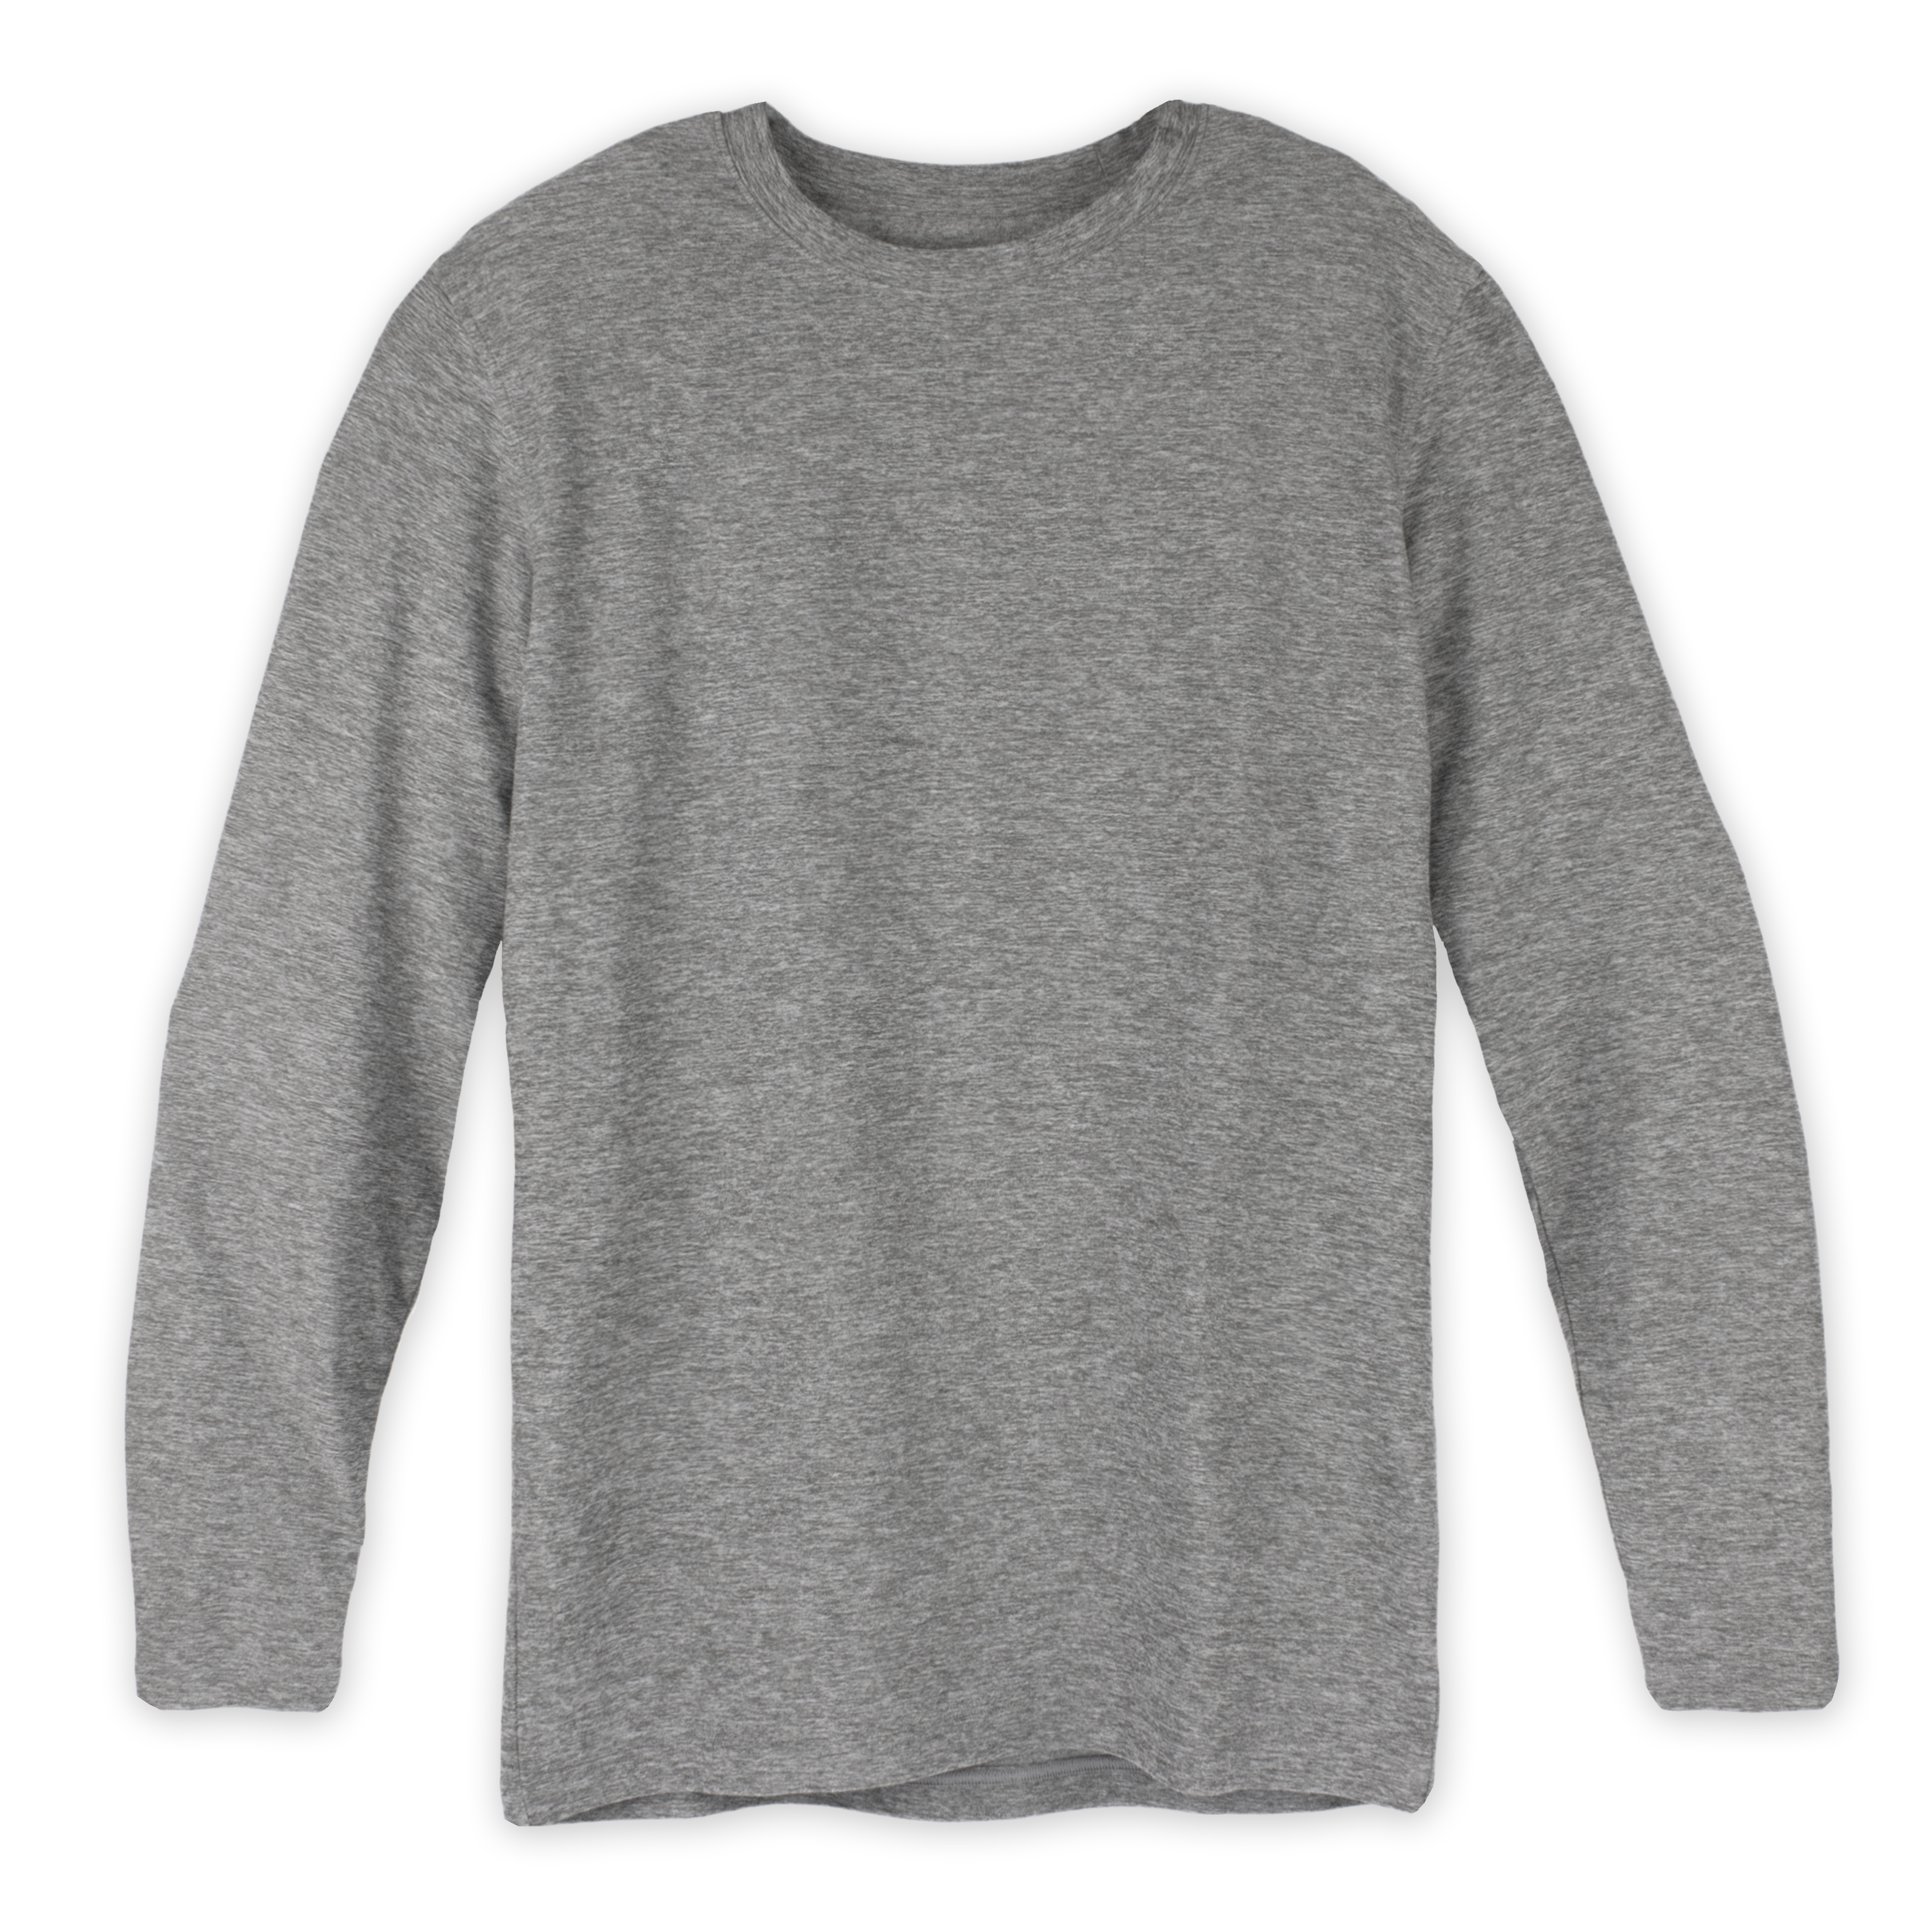 Long Sleeve Tech Tee Grey front with crewneck and heathered color